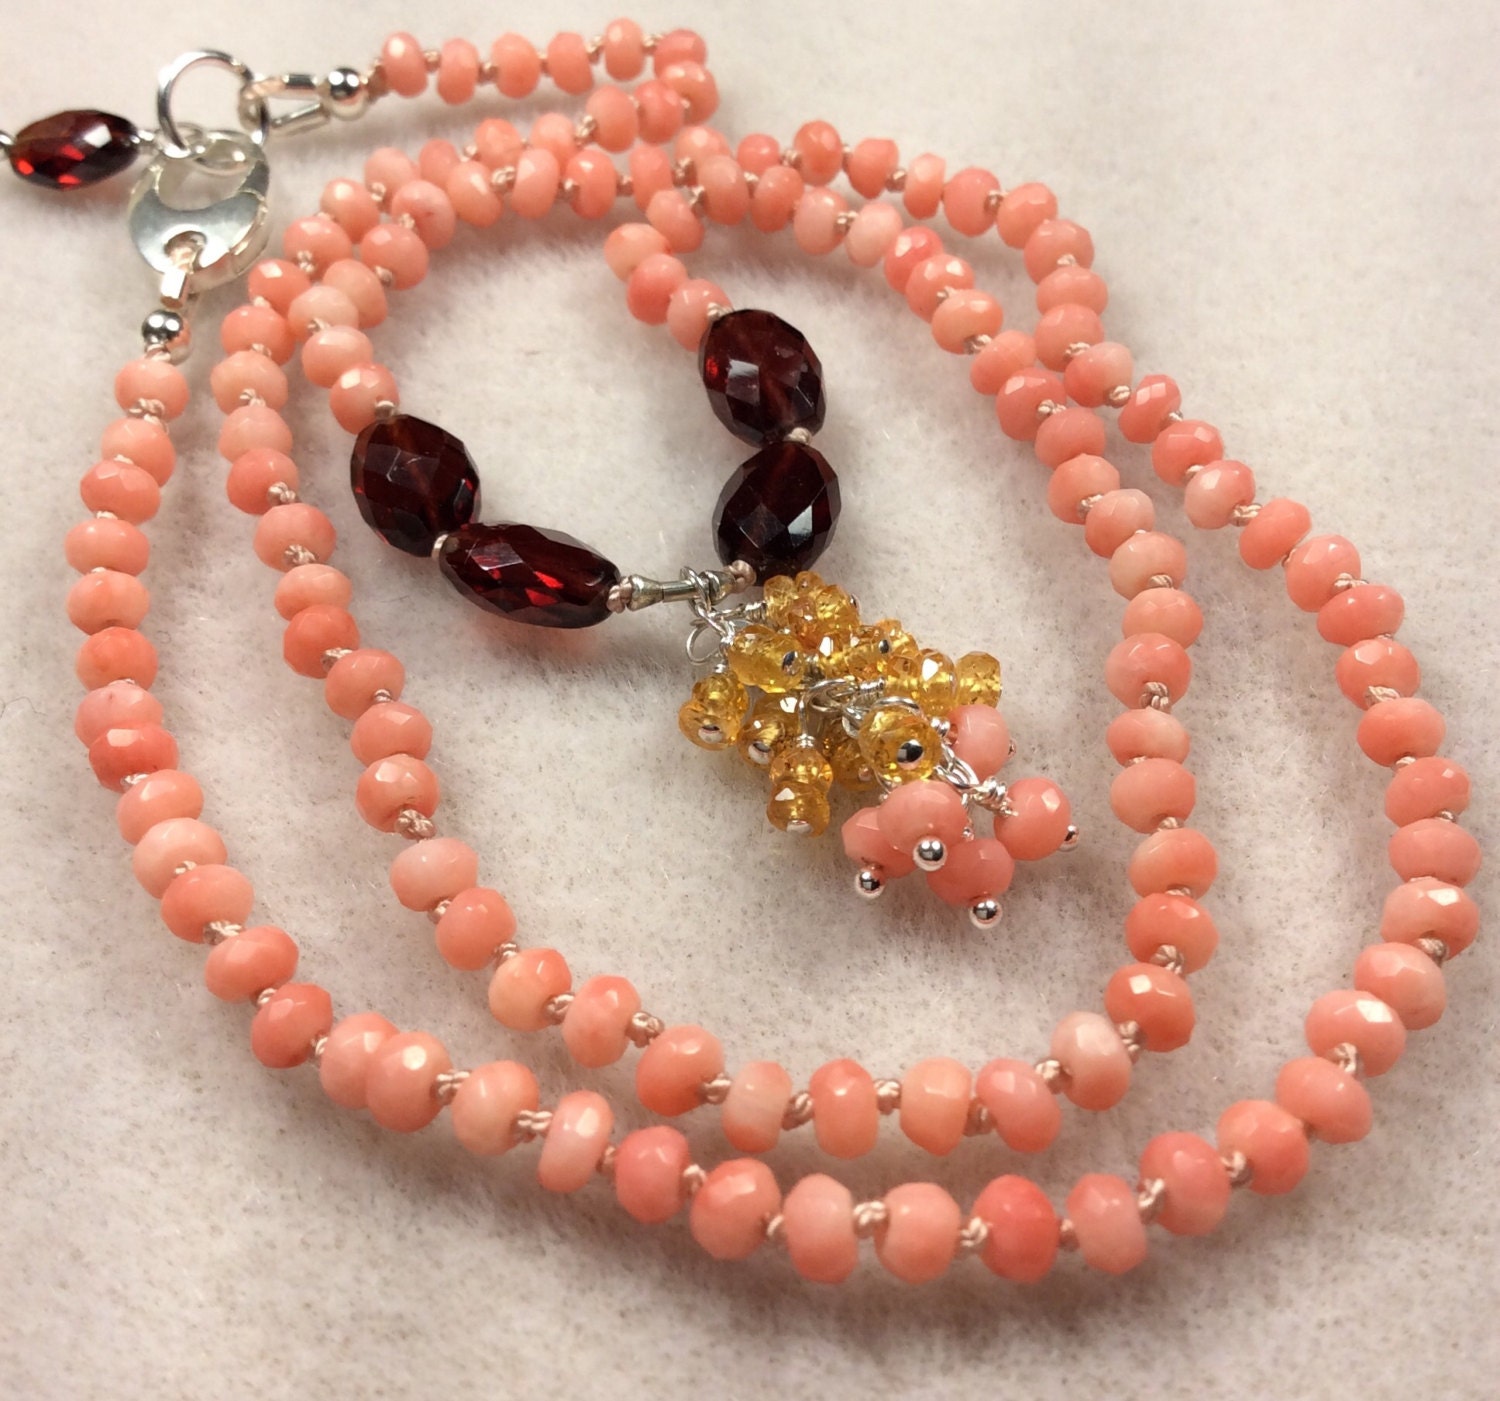 Genuine Coral Knotted Necklace-Salmon colored by IsaStone on Etsy